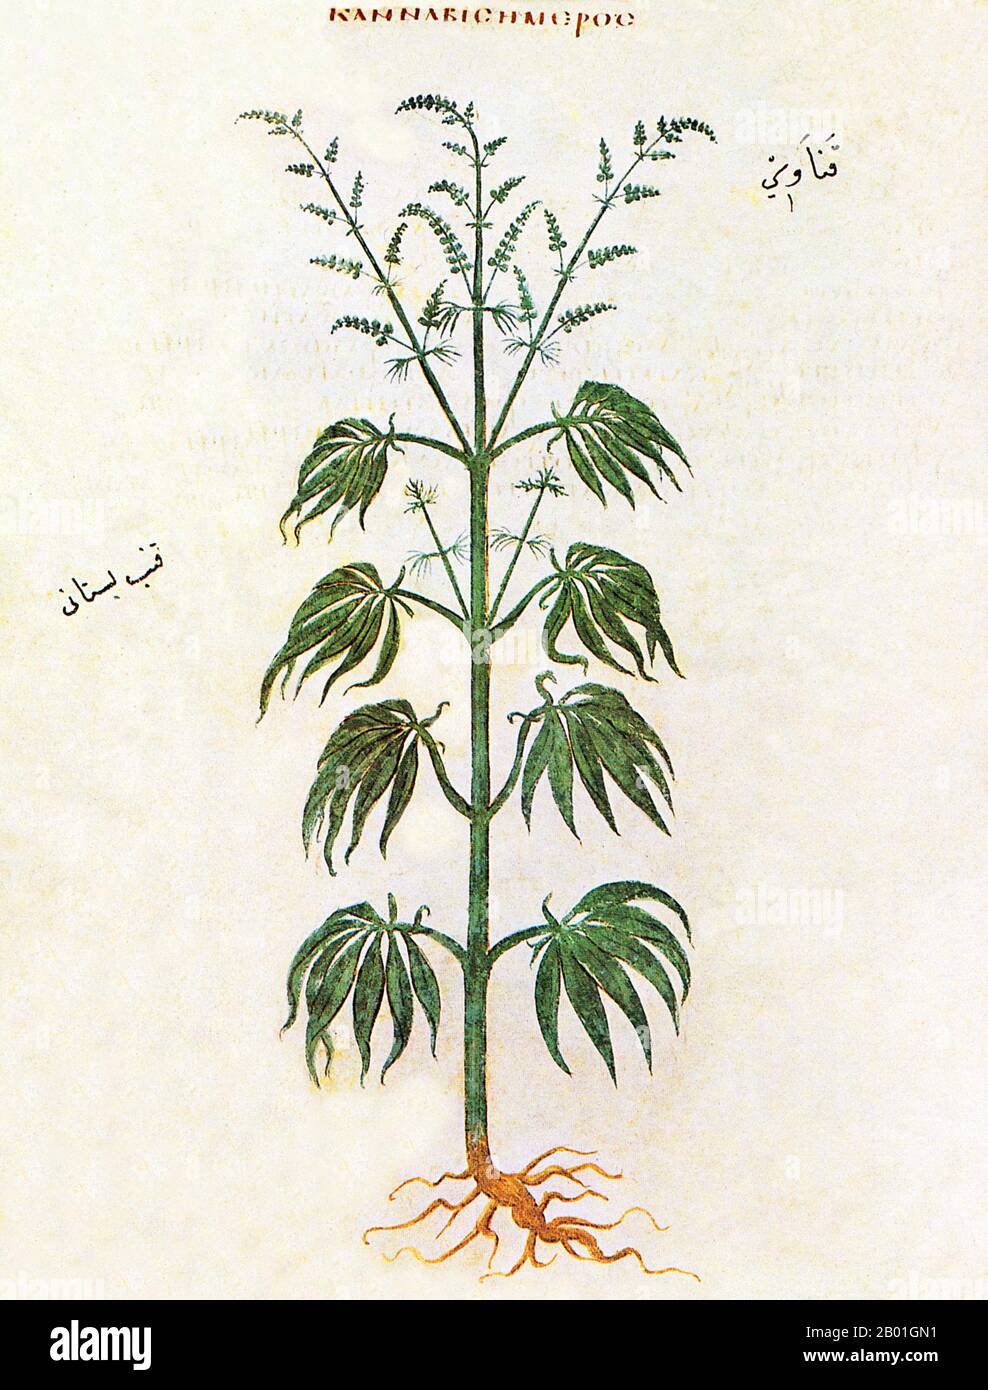 Greece/Byzantium/Turkey: An illustration of common hemp (Cannabis sativa) from the Codex Vienna Dioscorides, 512 CE.  According to the accompanying description on page 168 recto, the plant is used as raw material for ropes, their fruits helps with ear problems. The Arabic text at left appears to read qinnab bustani قنب بستاني or 'garden hemp'.  The Vienna Dioscurides or Vienna Dioscorides is an early 6th century illuminated manuscript of De Materia Medica by Dioscorides in Greek. It is an important and rare example of a late antique scientific text. Stock Photo